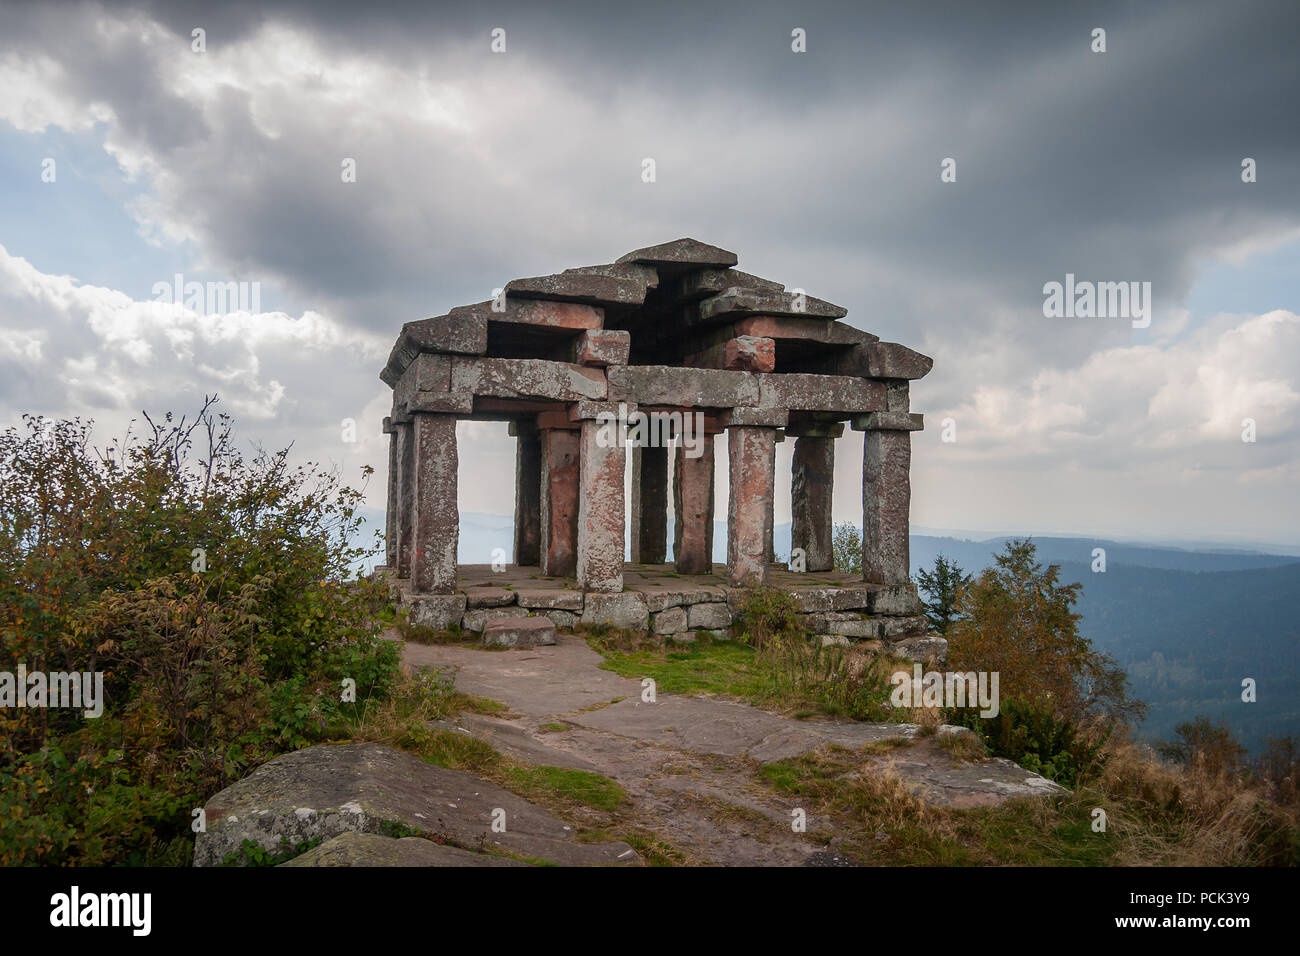 Temple of the Donon. Greco-roman classical antiquity architecture style building built in 1869 in the Vosges, Donon summit, Alsace, France. Stock Photo